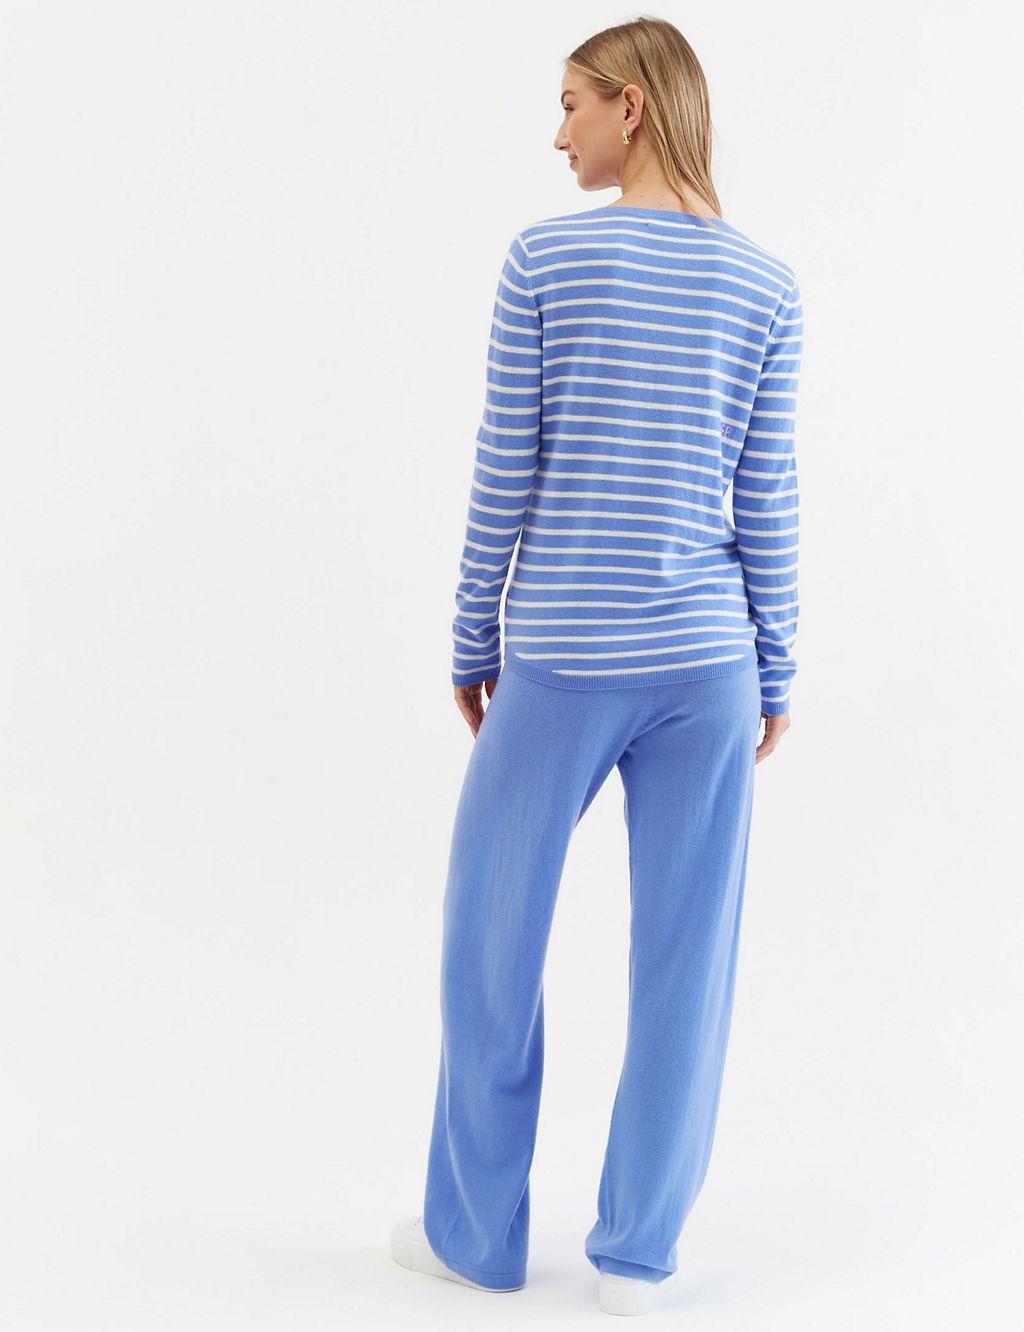 Wool Rich Striped Sweatshirt with Cashmere 4 of 4